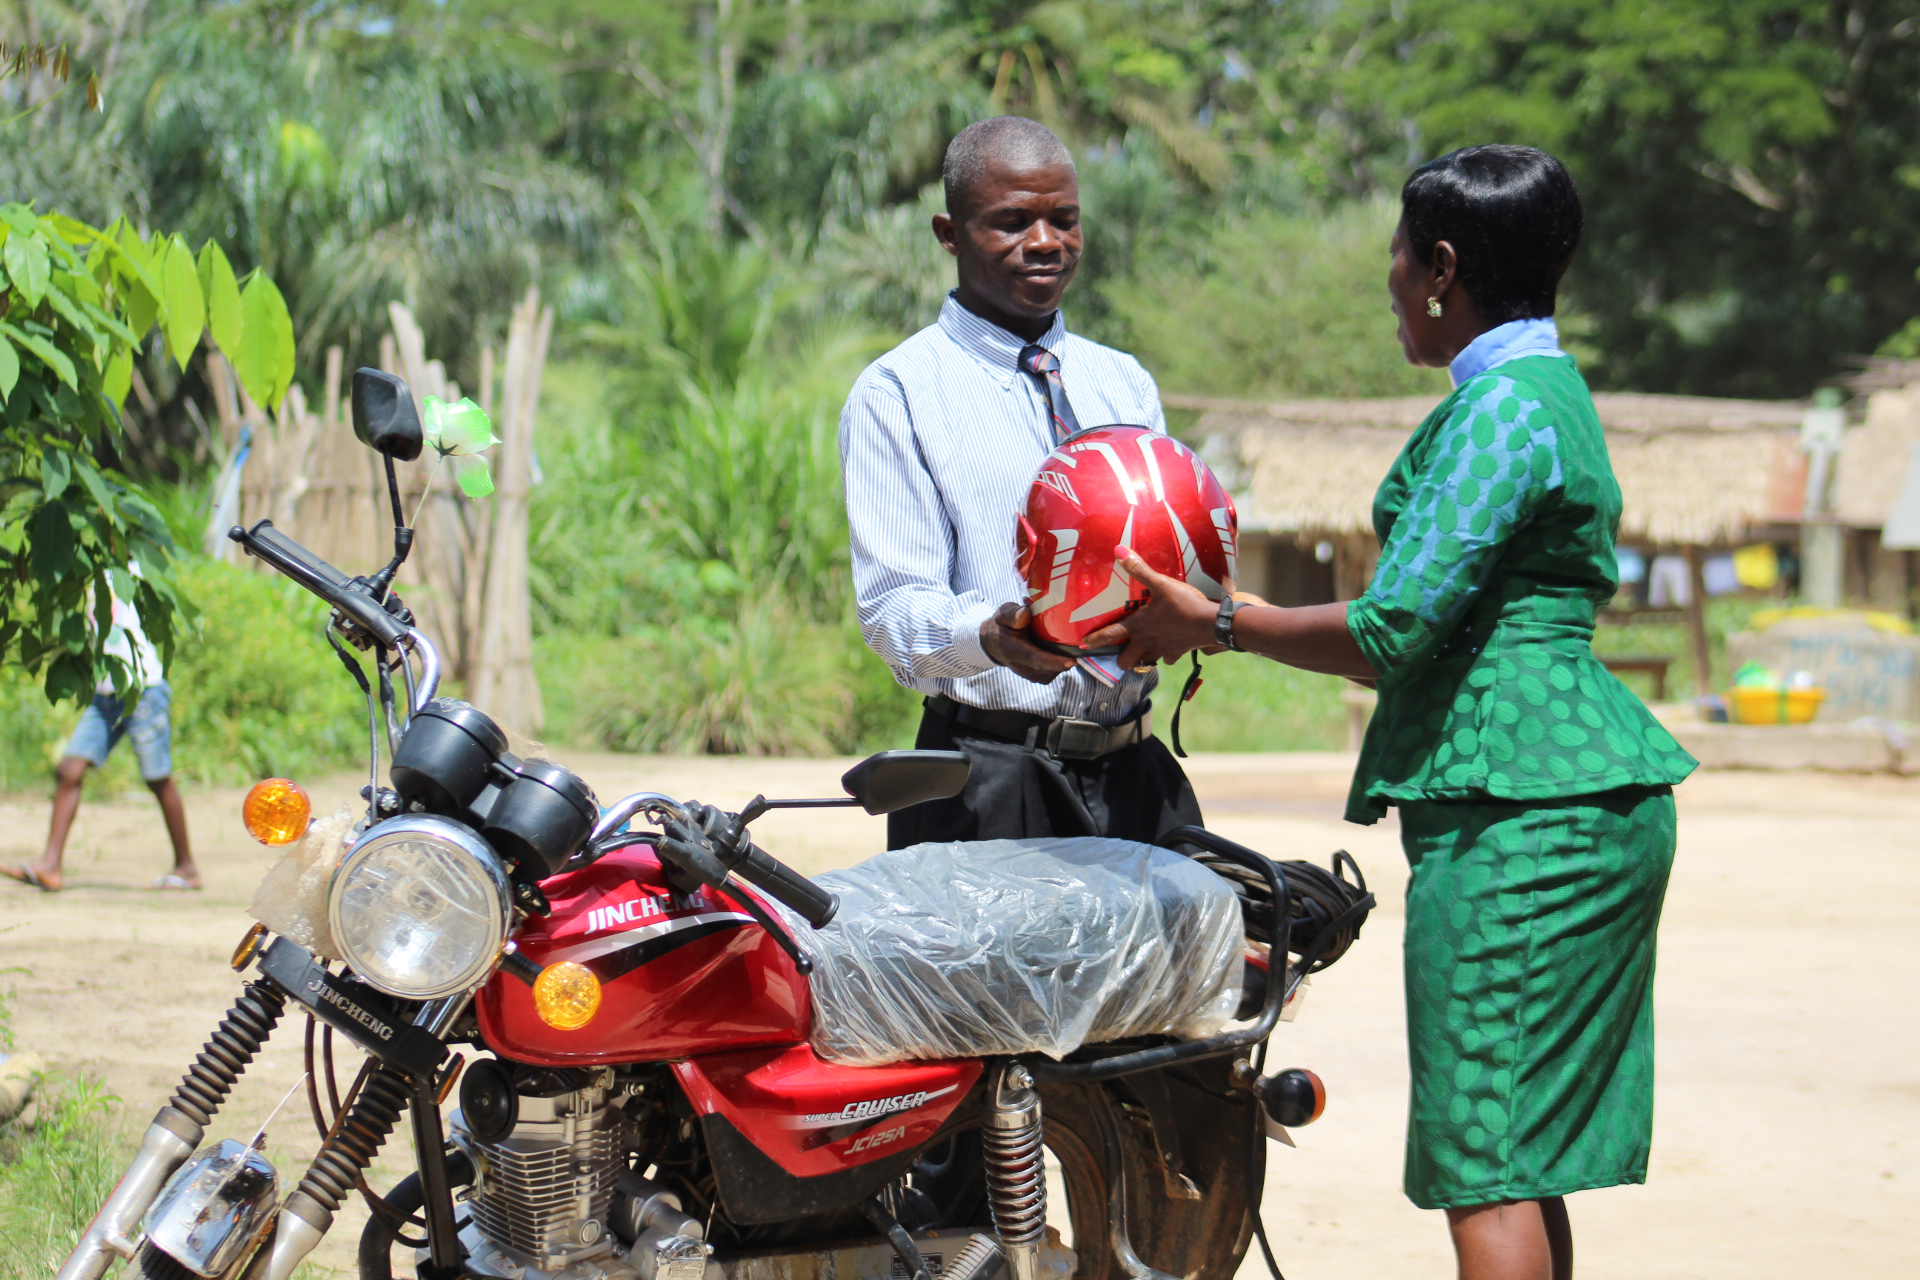 The Rev. Cecelia Marpleh, district superintendent for the Liberia Conference, presents a motorbike to Pastor William Kulah for his travels to Gbanjuloma United Methodist Church each week. With the motorbike, it takes him five hours to get to his assigned church. Photo be E Julu Swen, UMNS.